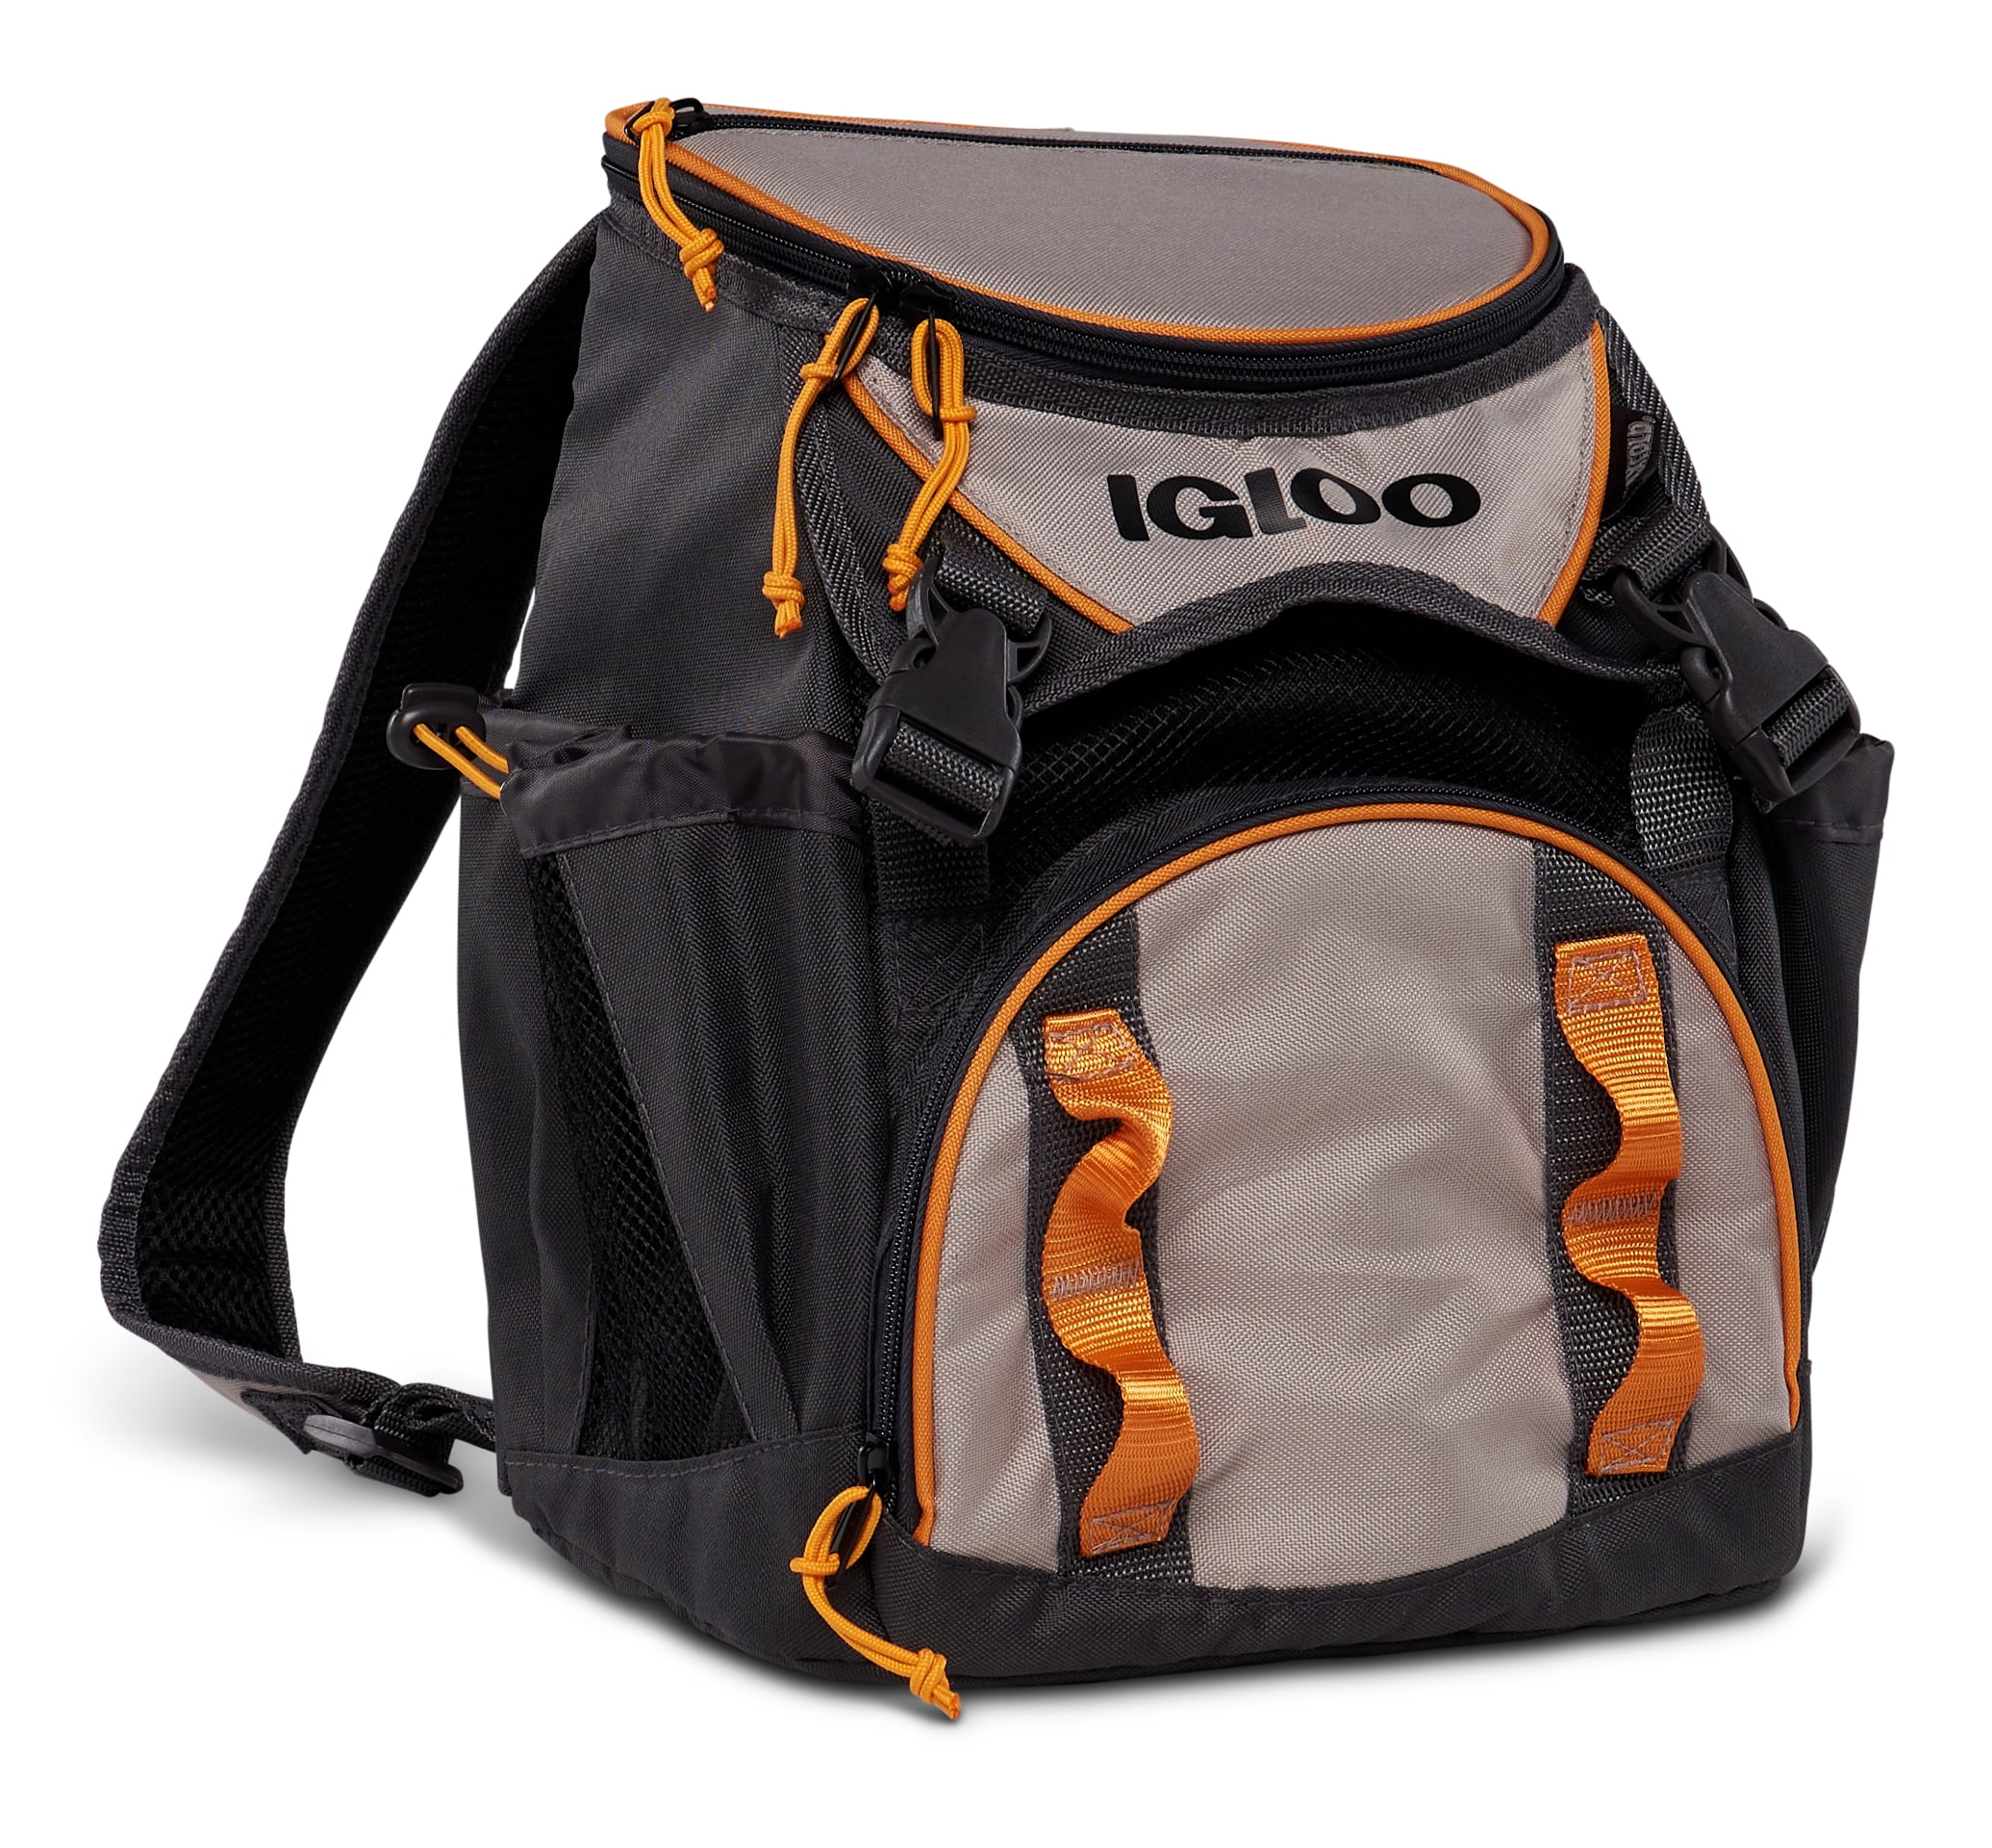 Igloo Adventure Backpack Cooler 19 Cans 